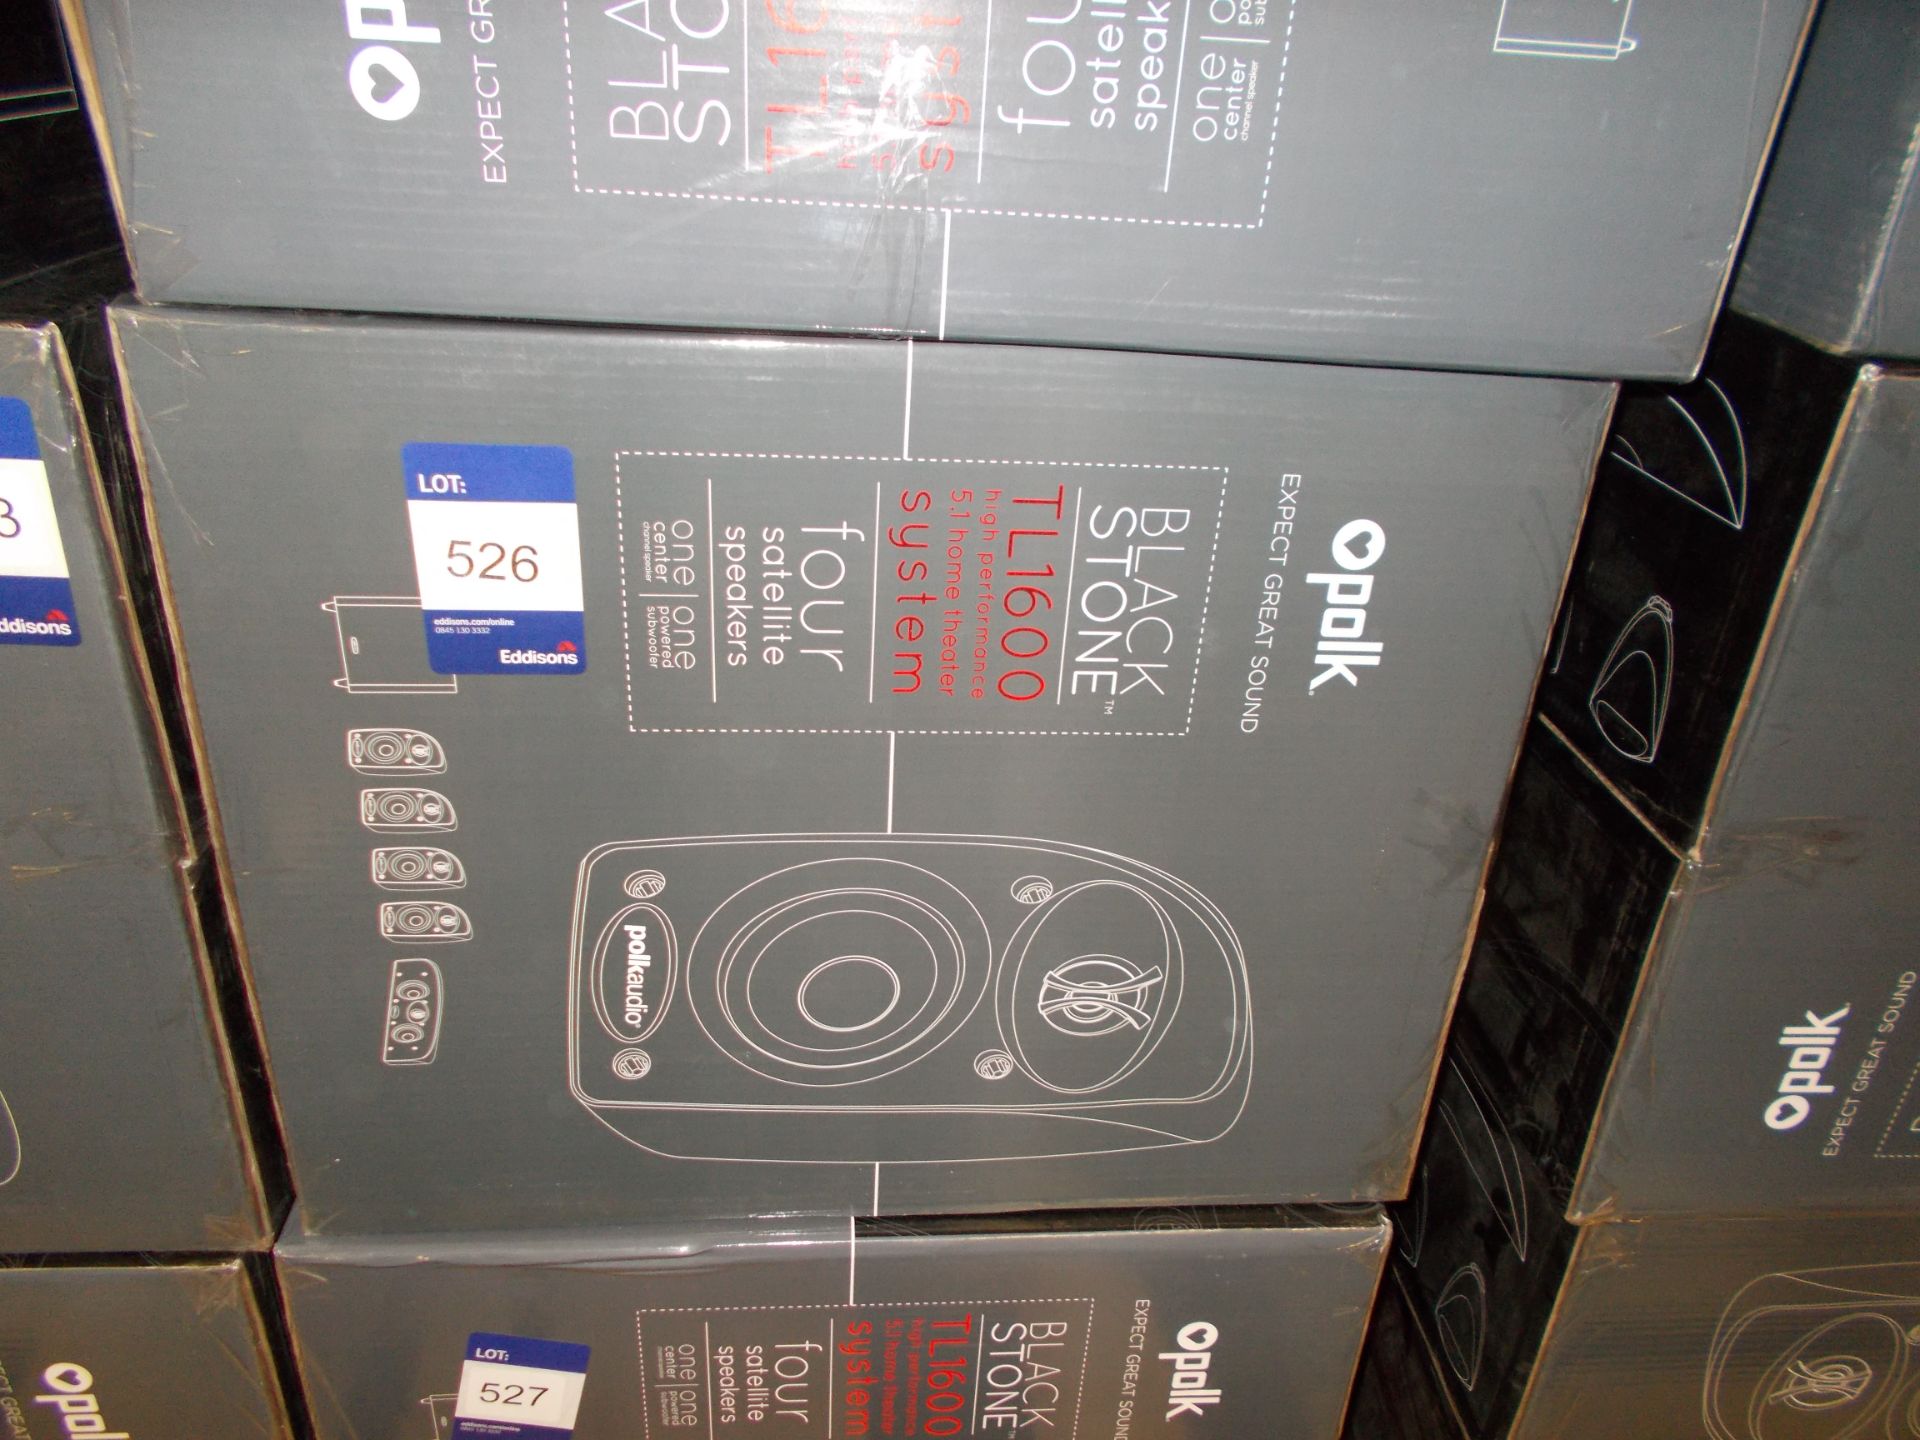 Polk Black Stone TL1600 5.1 Home Theatre System (boxed) – RRP £219